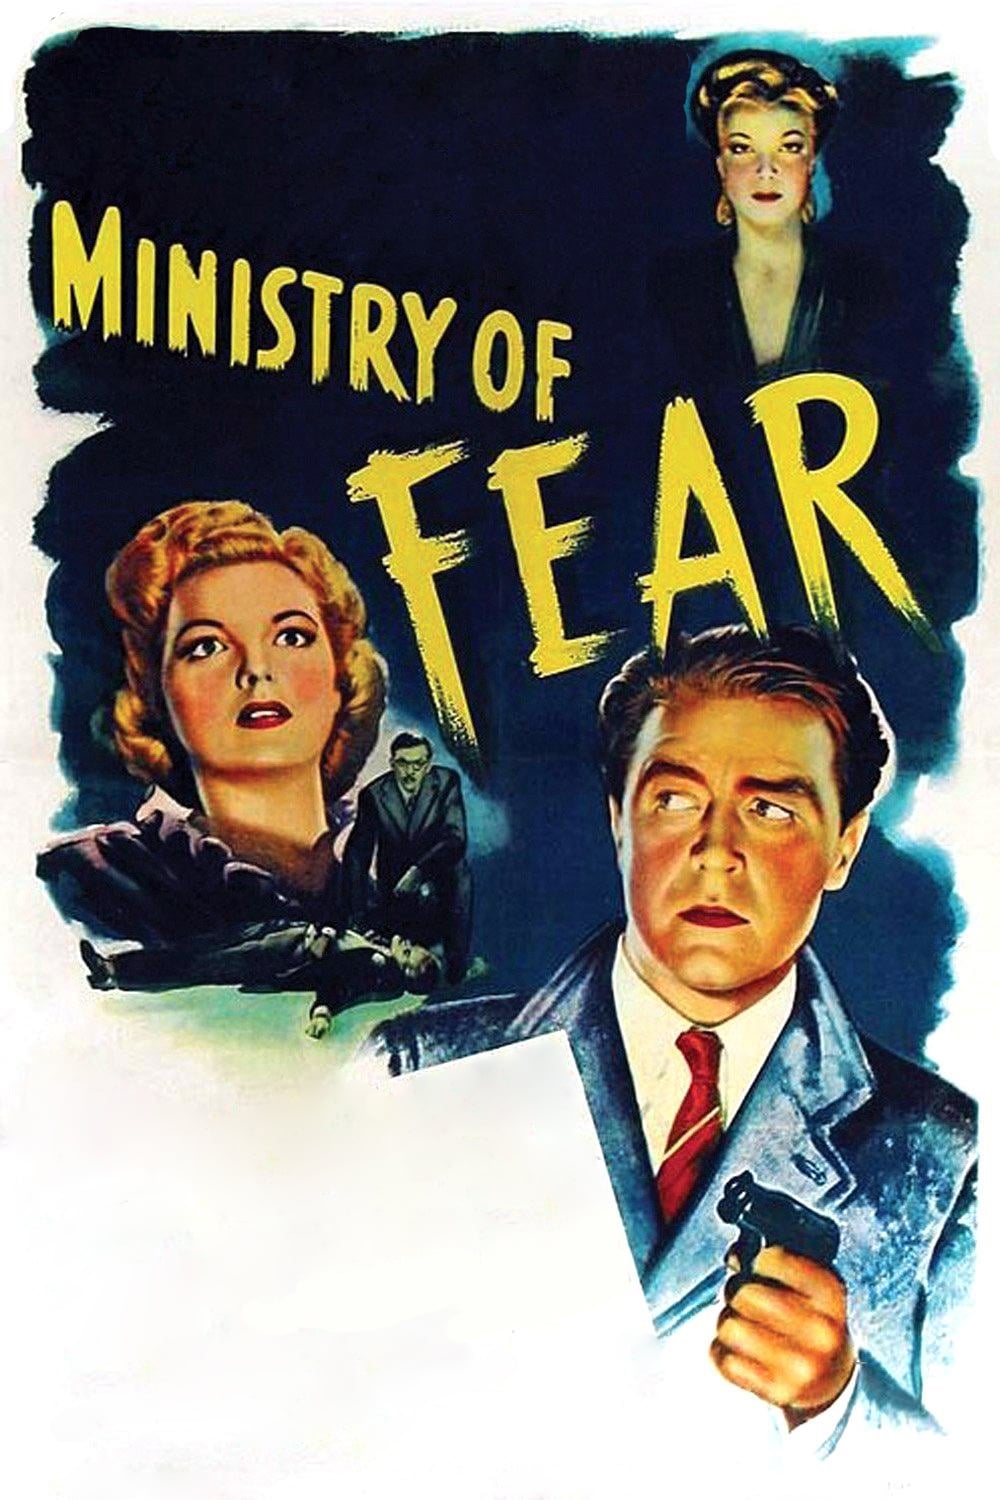 Ministry of Fear - Ministry of Fear